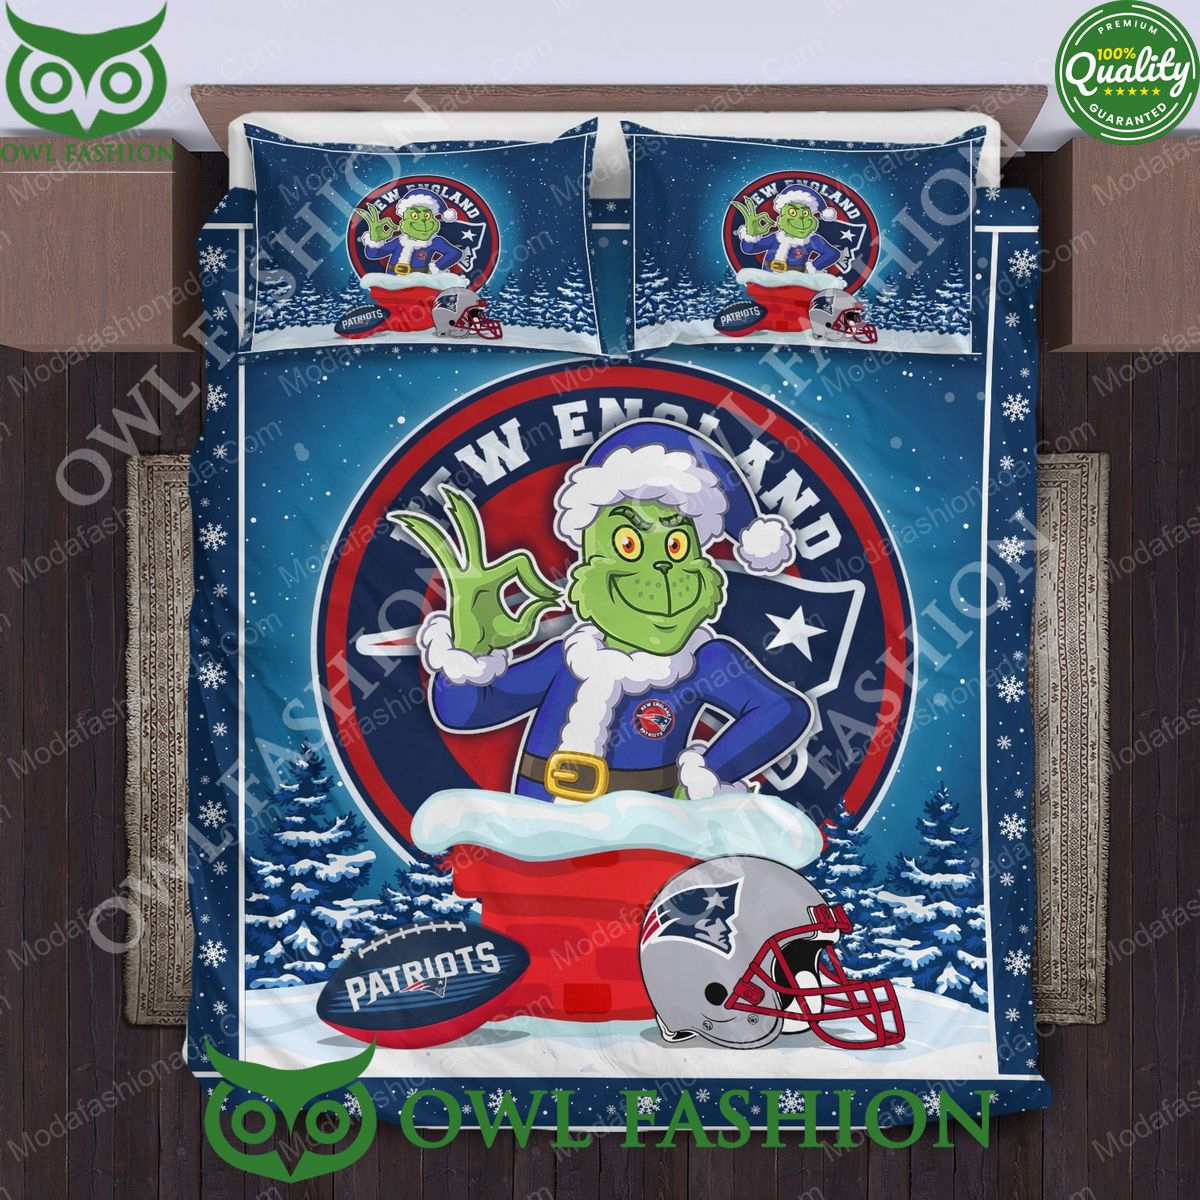 The Grinch NFL New England Patriots Christmas Bedding Sets